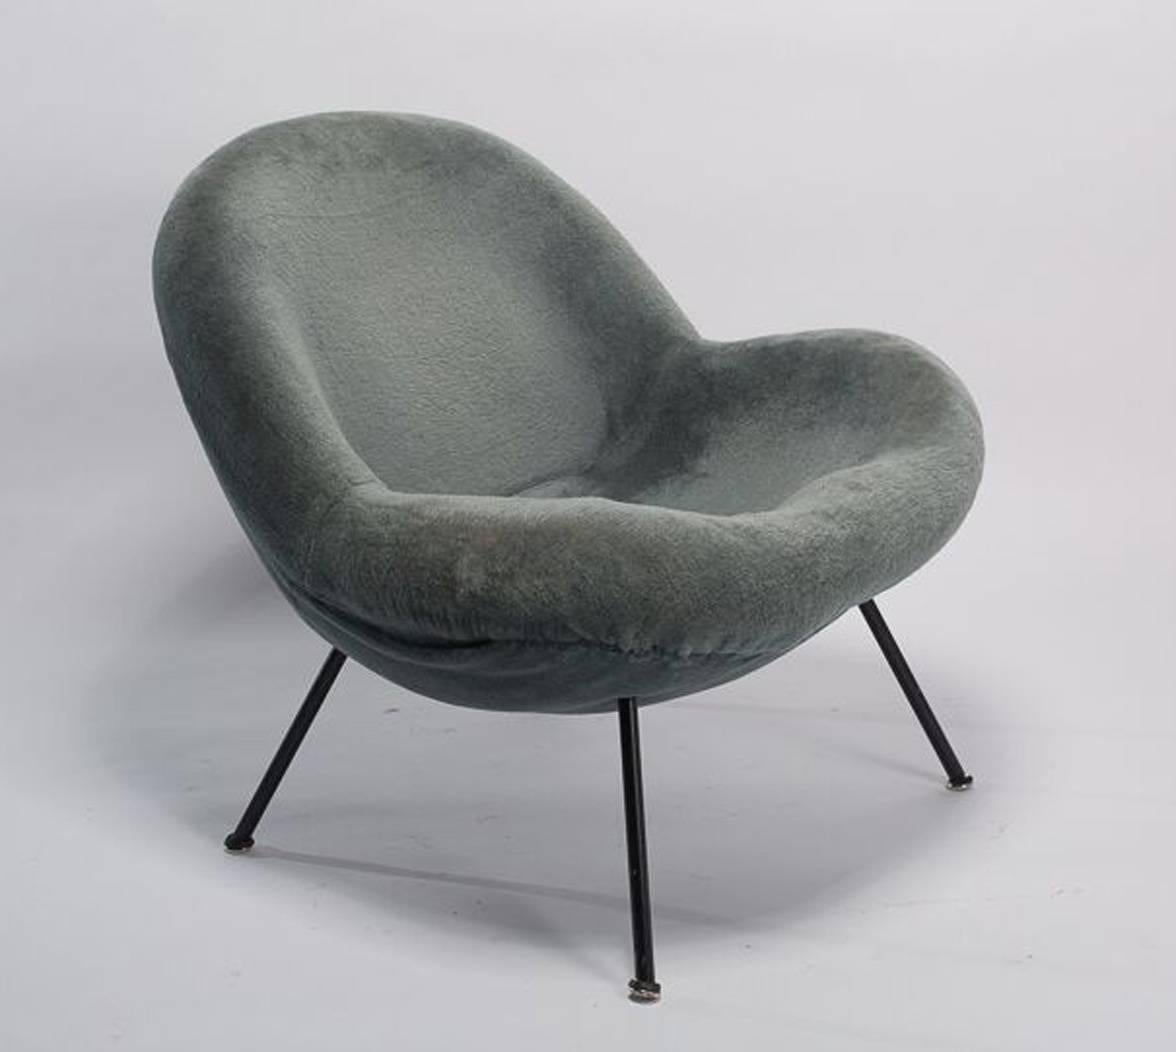 Rare Fritz Neth lounge chair manufactured by 